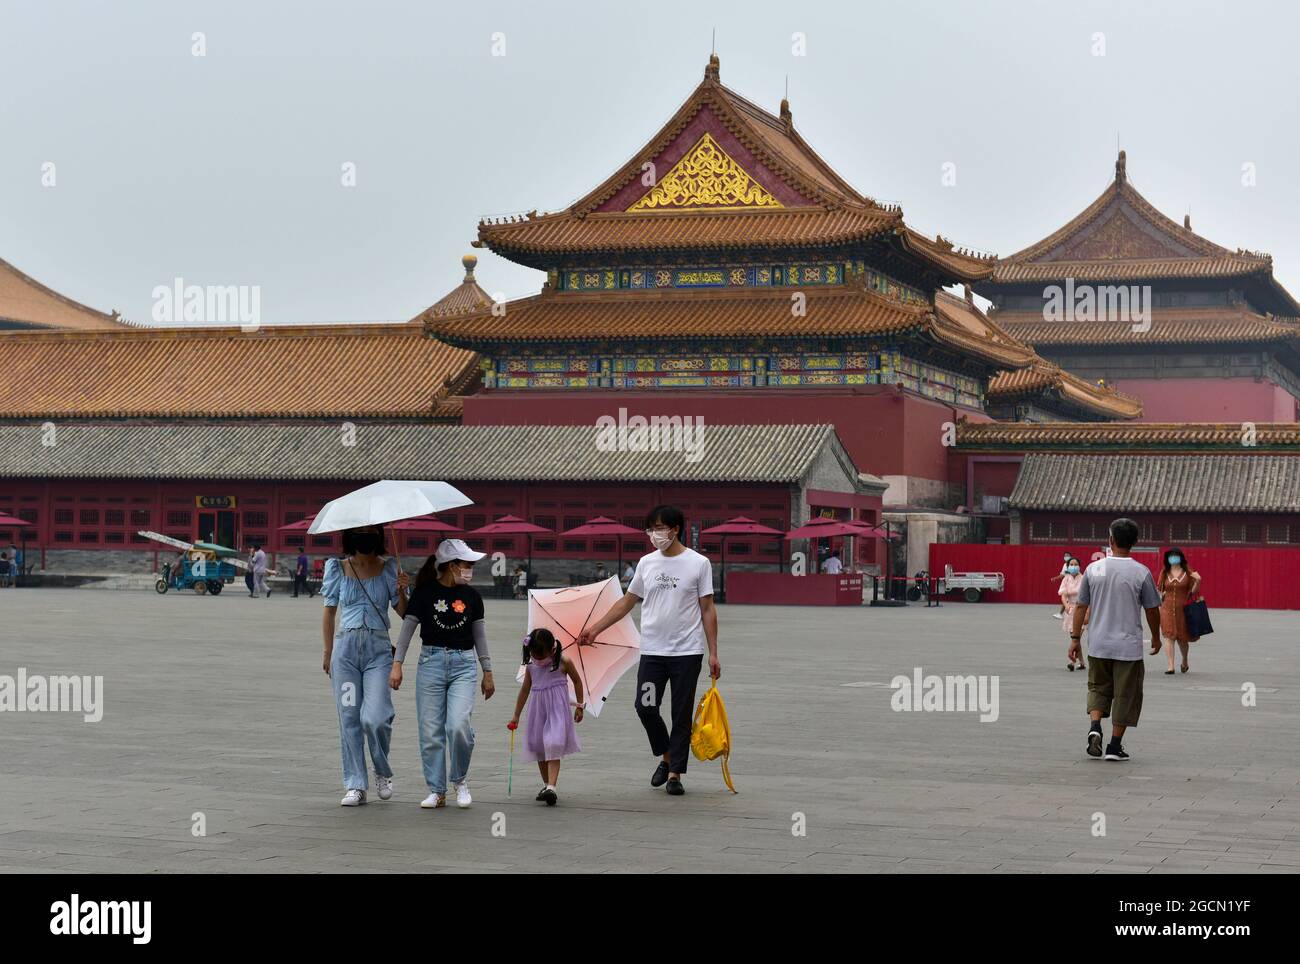 Beijing, China. 8th Aug, 2021. People wearing face masks as a preventive measure against the spread of covid-19 walk around the Forbidden City in Beijing.President Xi Jinping said on Thursday that China will provide a total of 2 billion doses of COVID-19 vaccines to the world this year, in the latest effort to honor its commitment to make vaccines a global public good by ensuring vaccine accessibility and affordability. (Credit Image: © Sheldon Cooper/SOPA Images via ZUMA Press Wire) Stock Photo